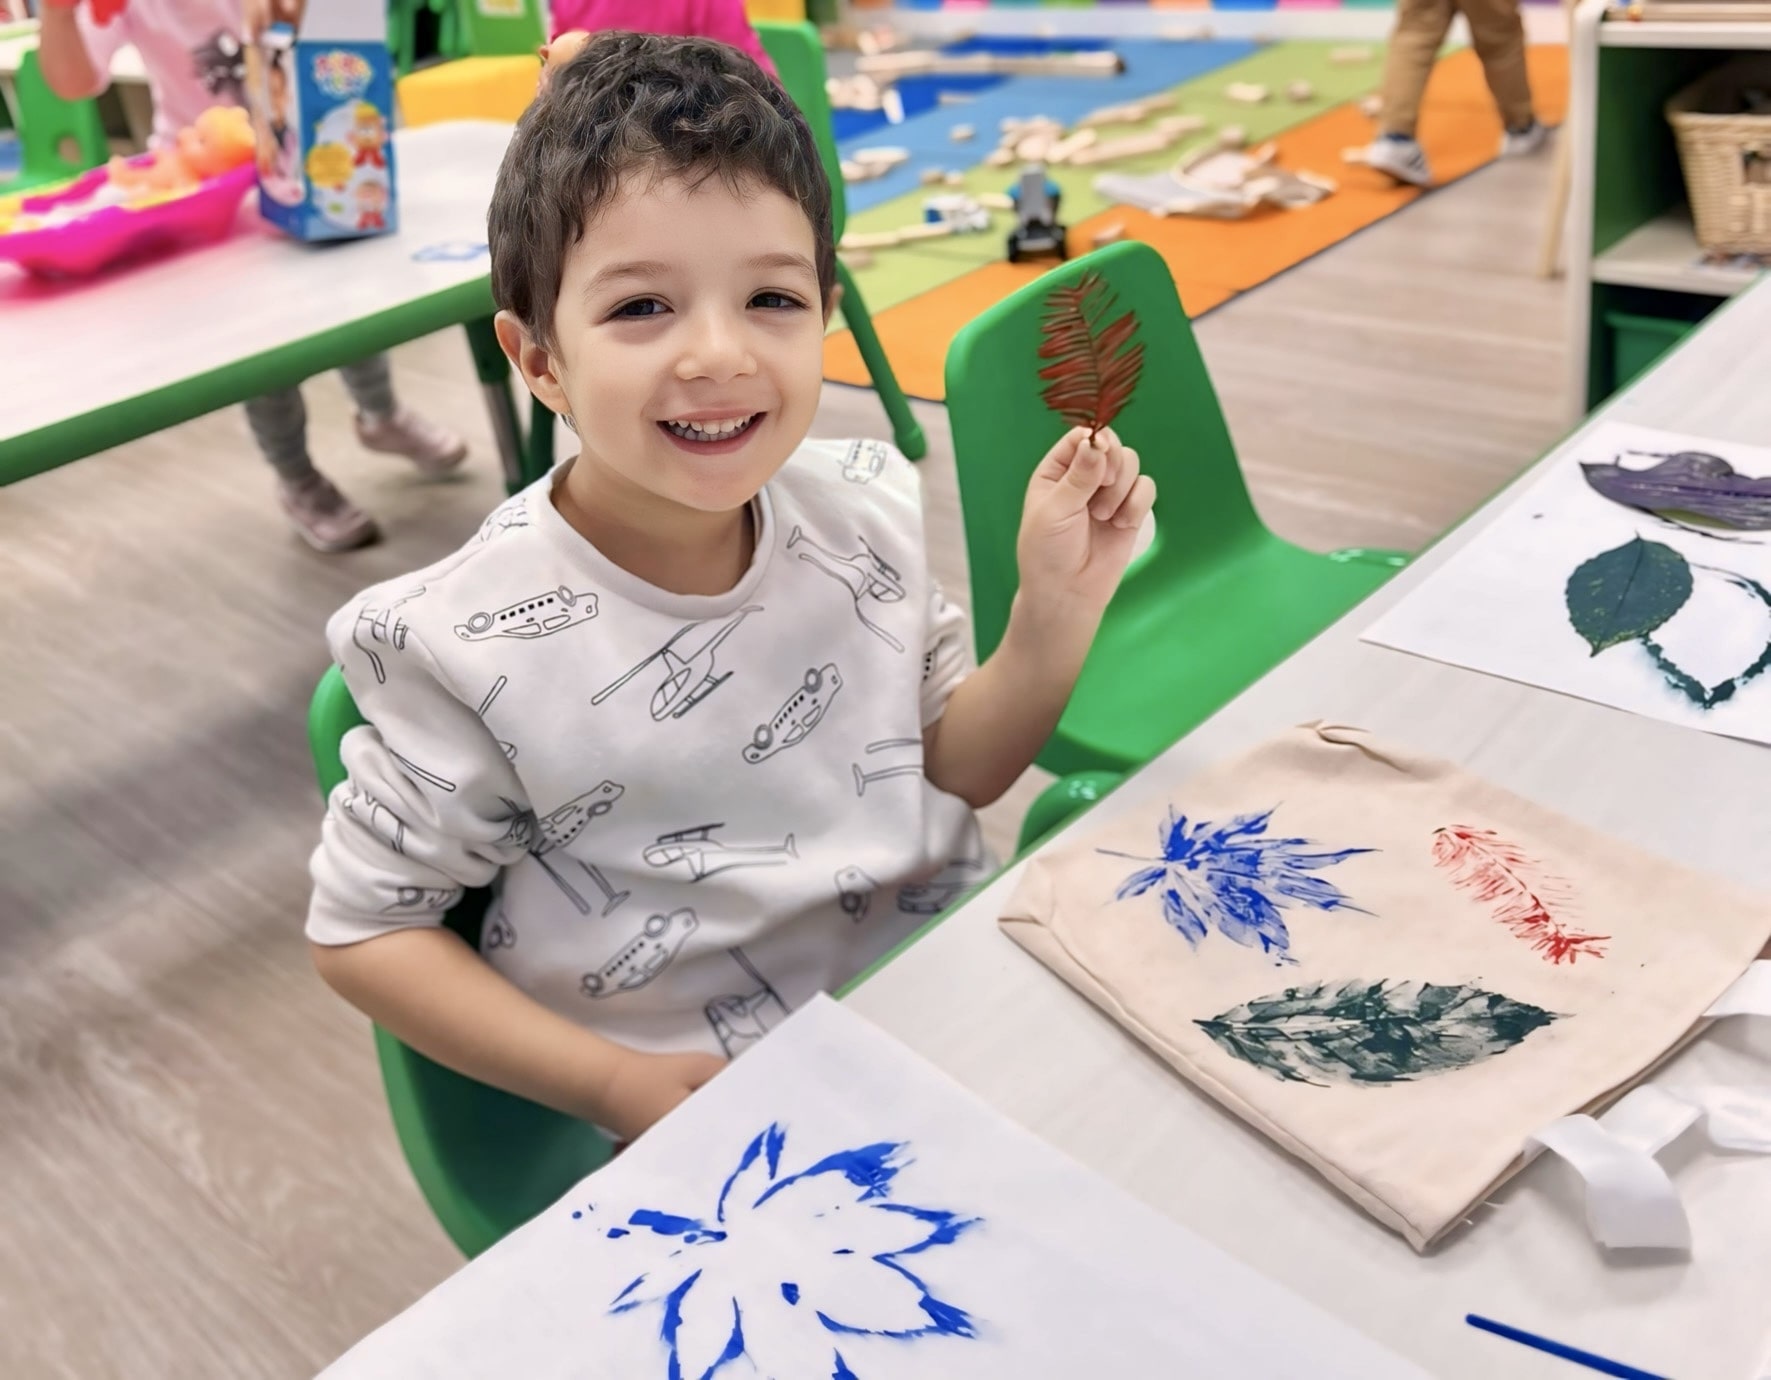 Smiling child displaying leaf stamp art on fabric, representing a creative eco-friendly hack for kids.